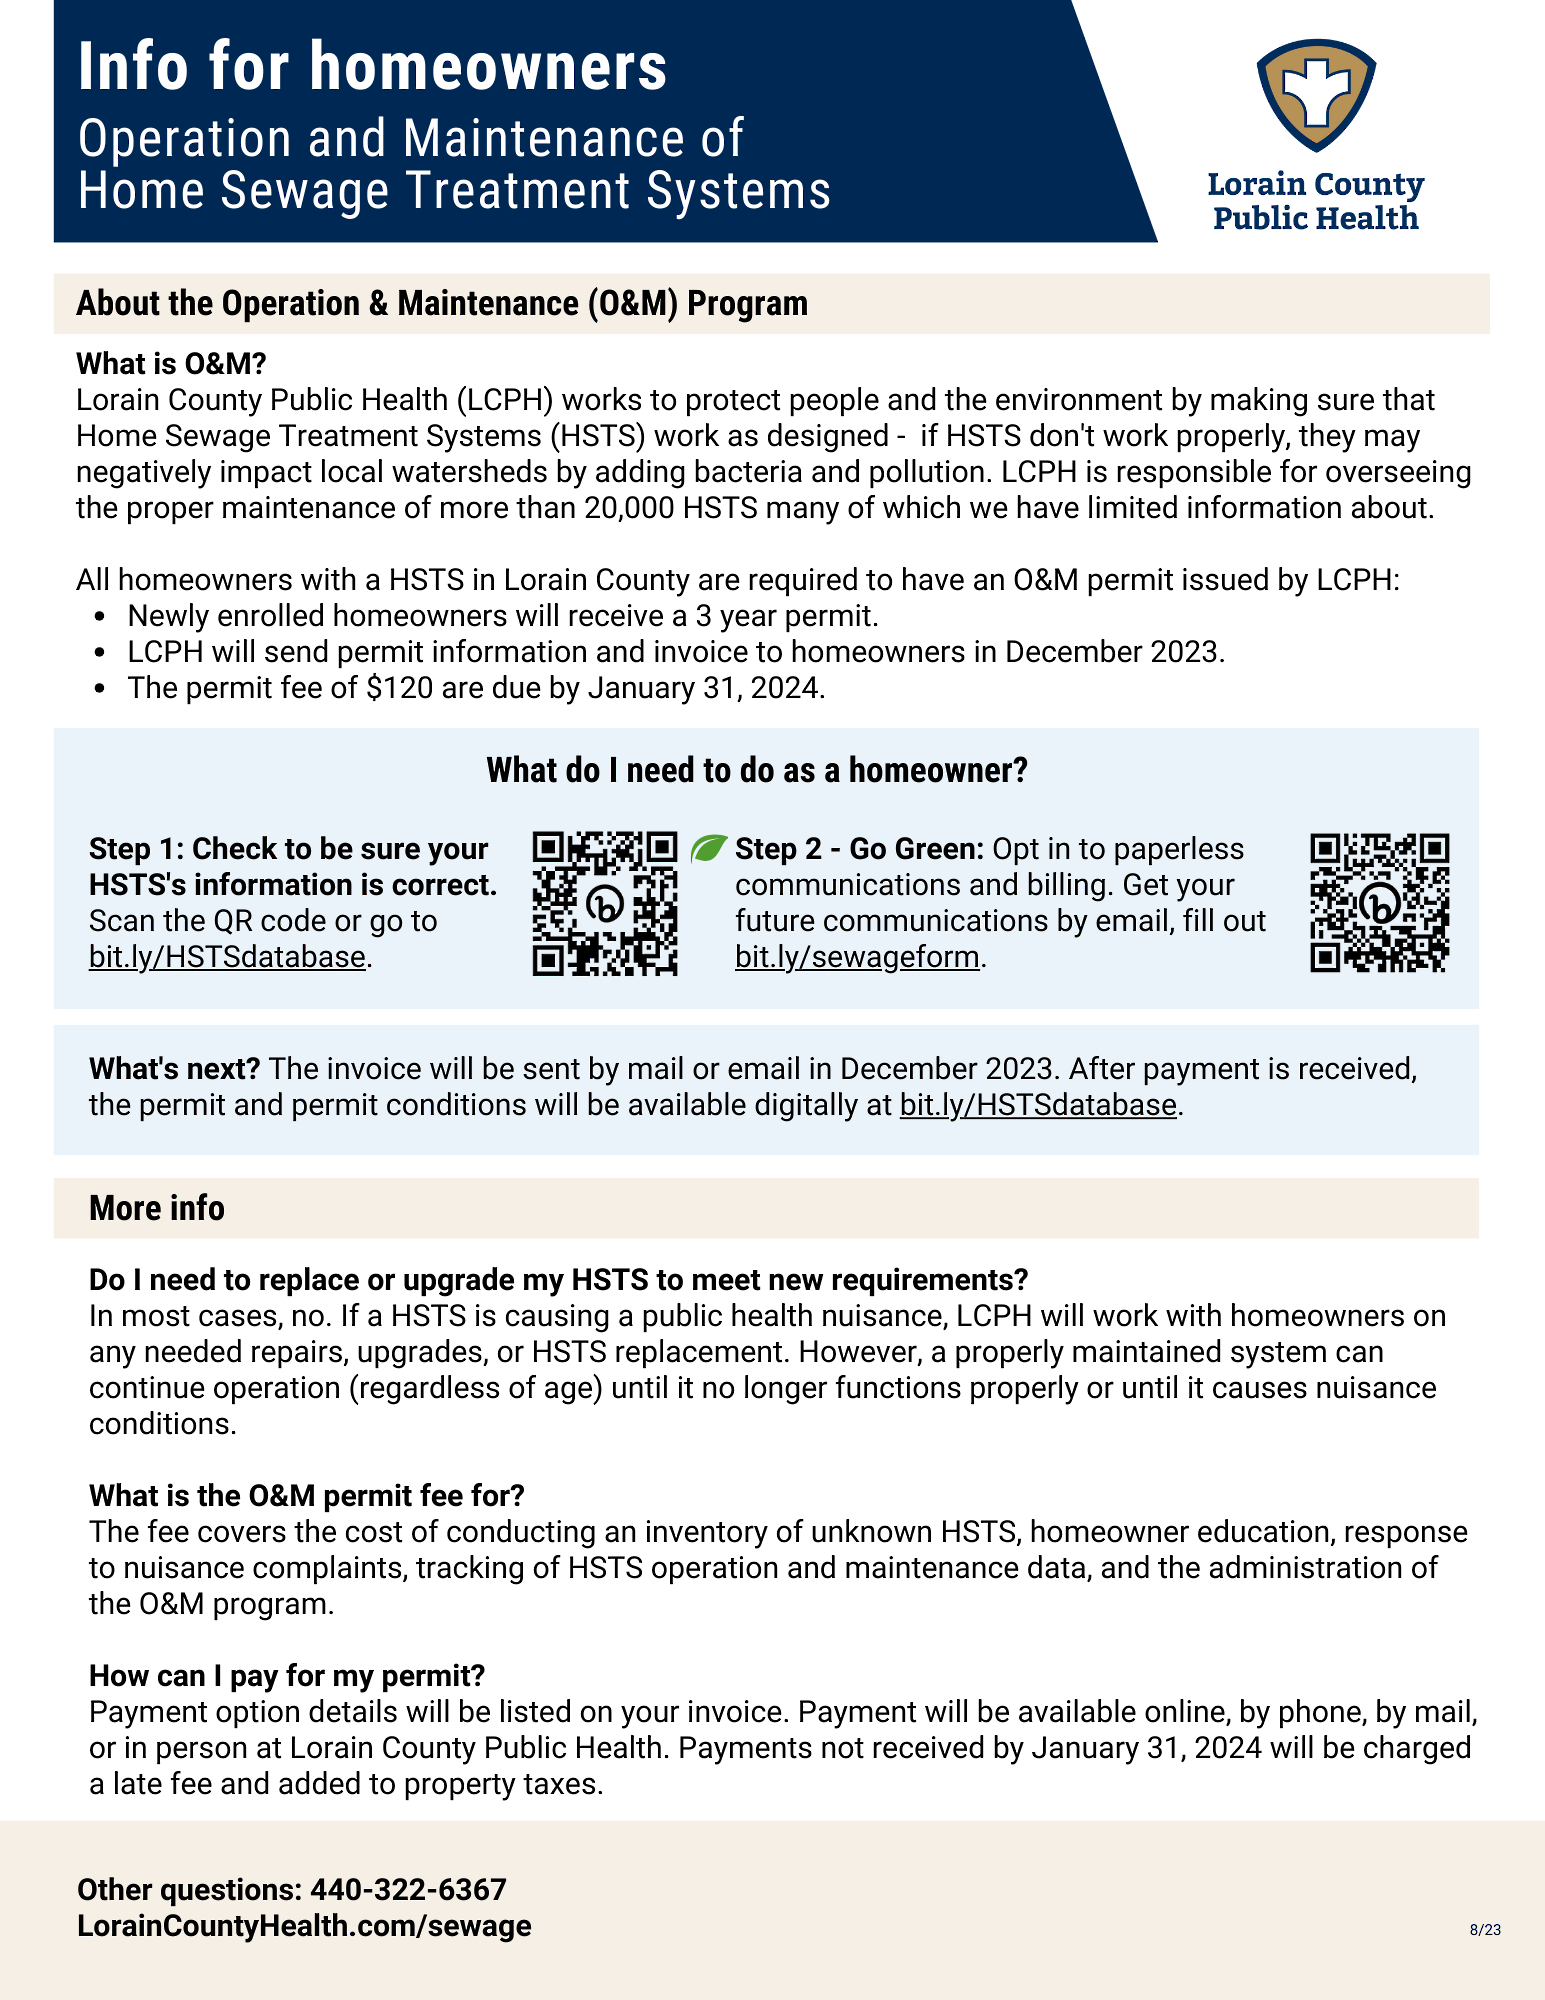 a flyer about the O&M program